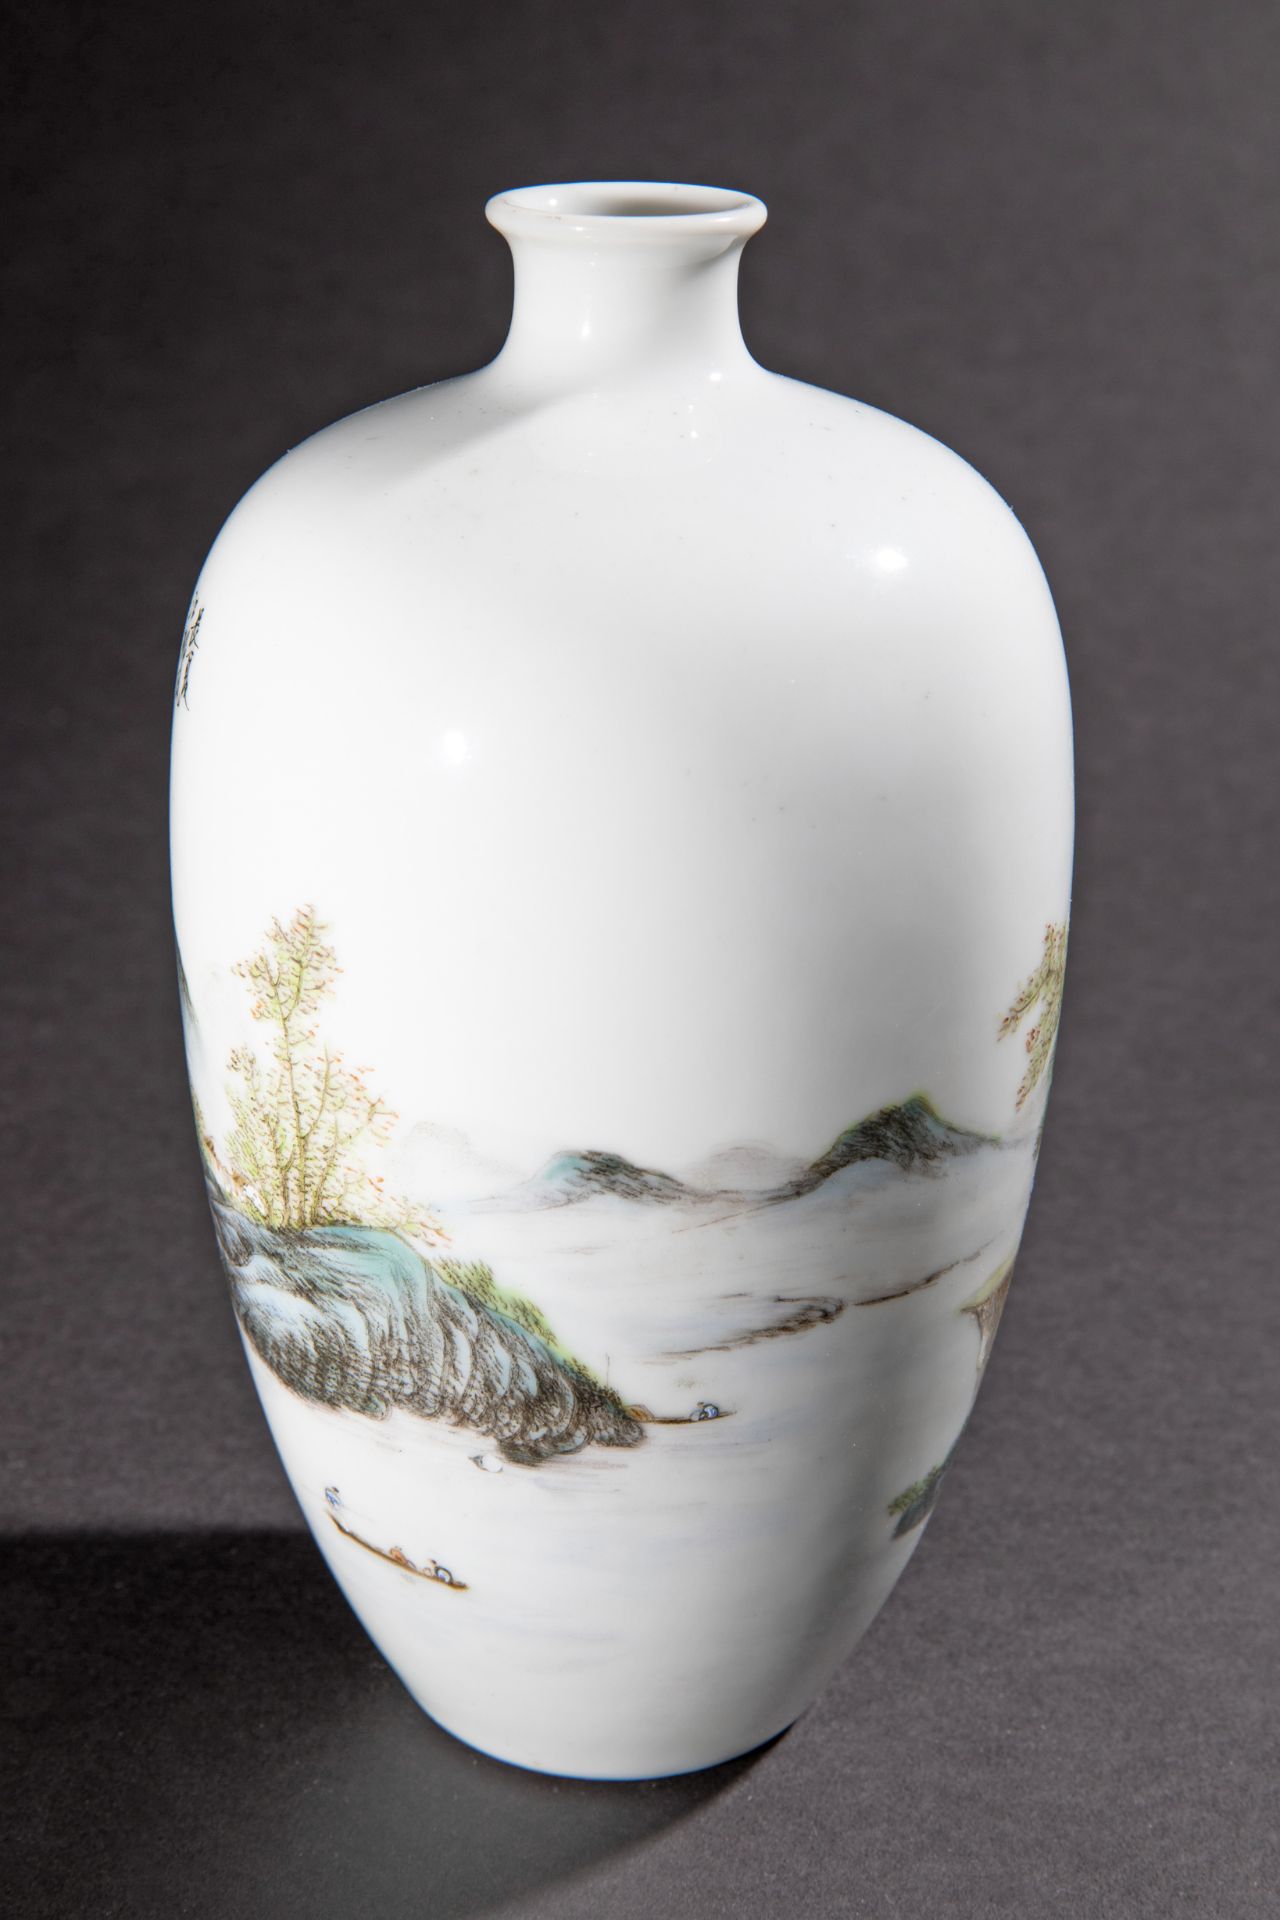 Vase with landscape and characters, China, Wang Xiaoting, Republic Time, 1900-1949 - Image 2 of 5